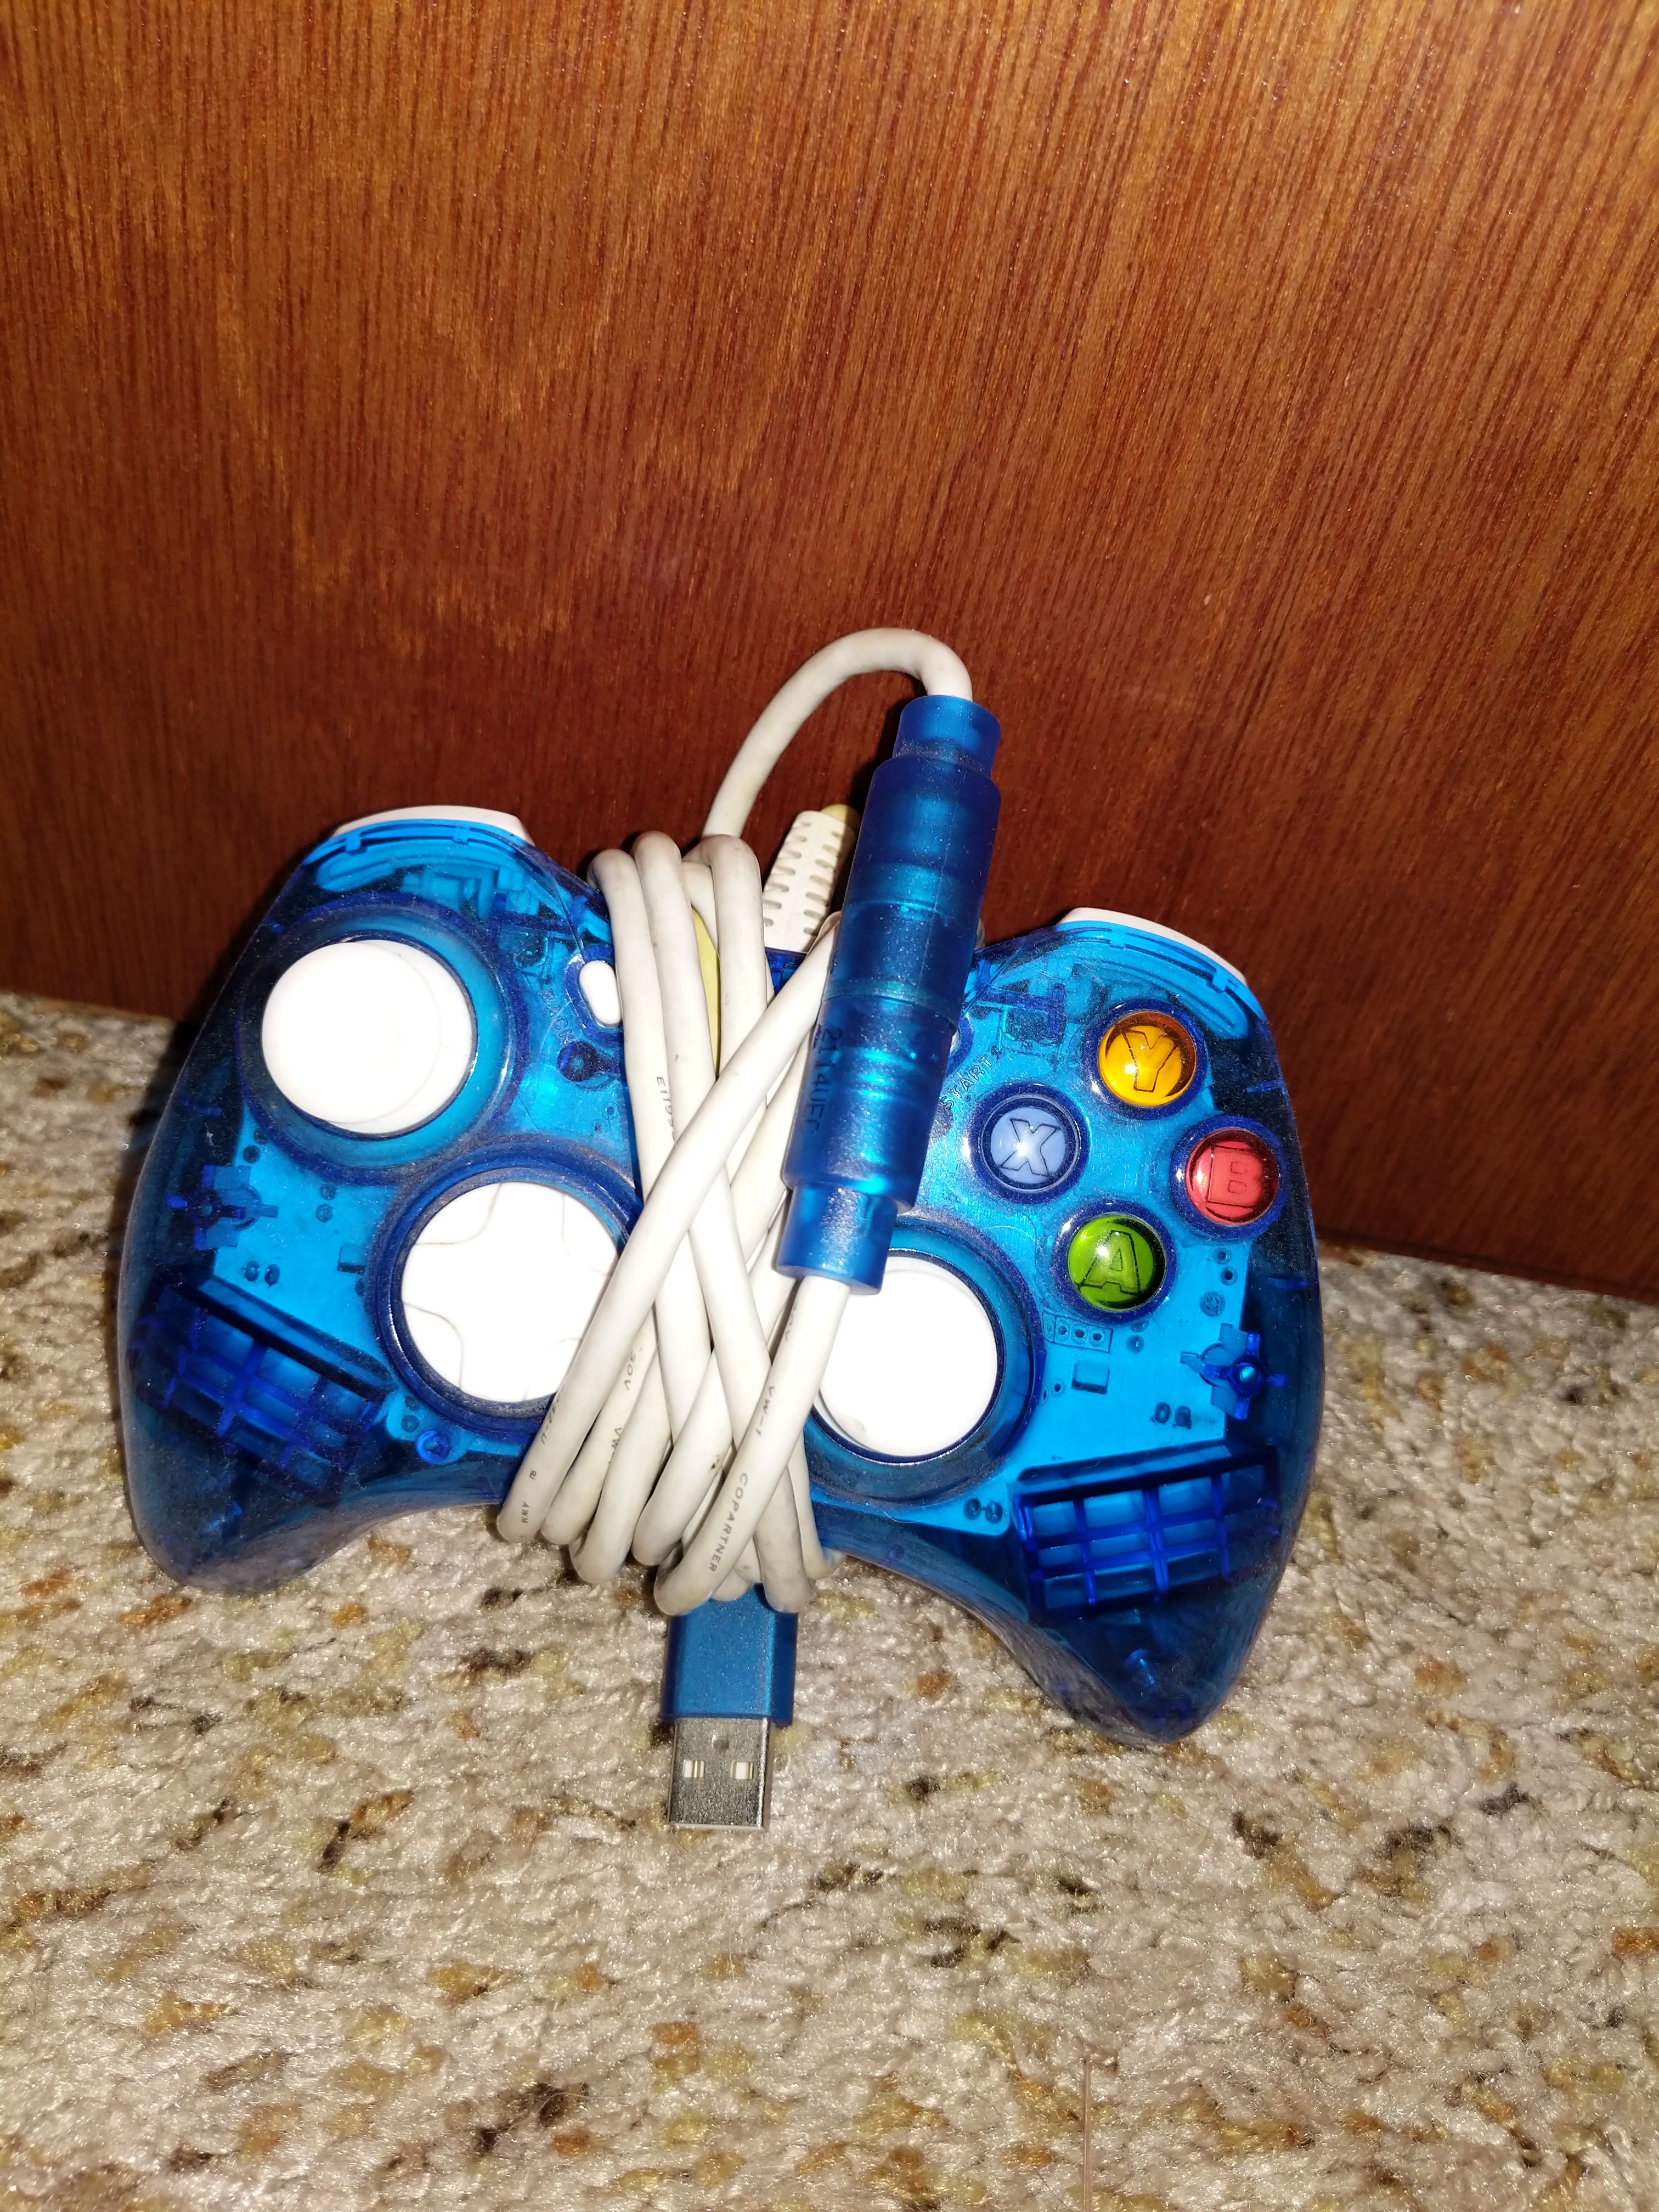 Rock candy Xbox controller wired. Usb. Works for PC and Xbox